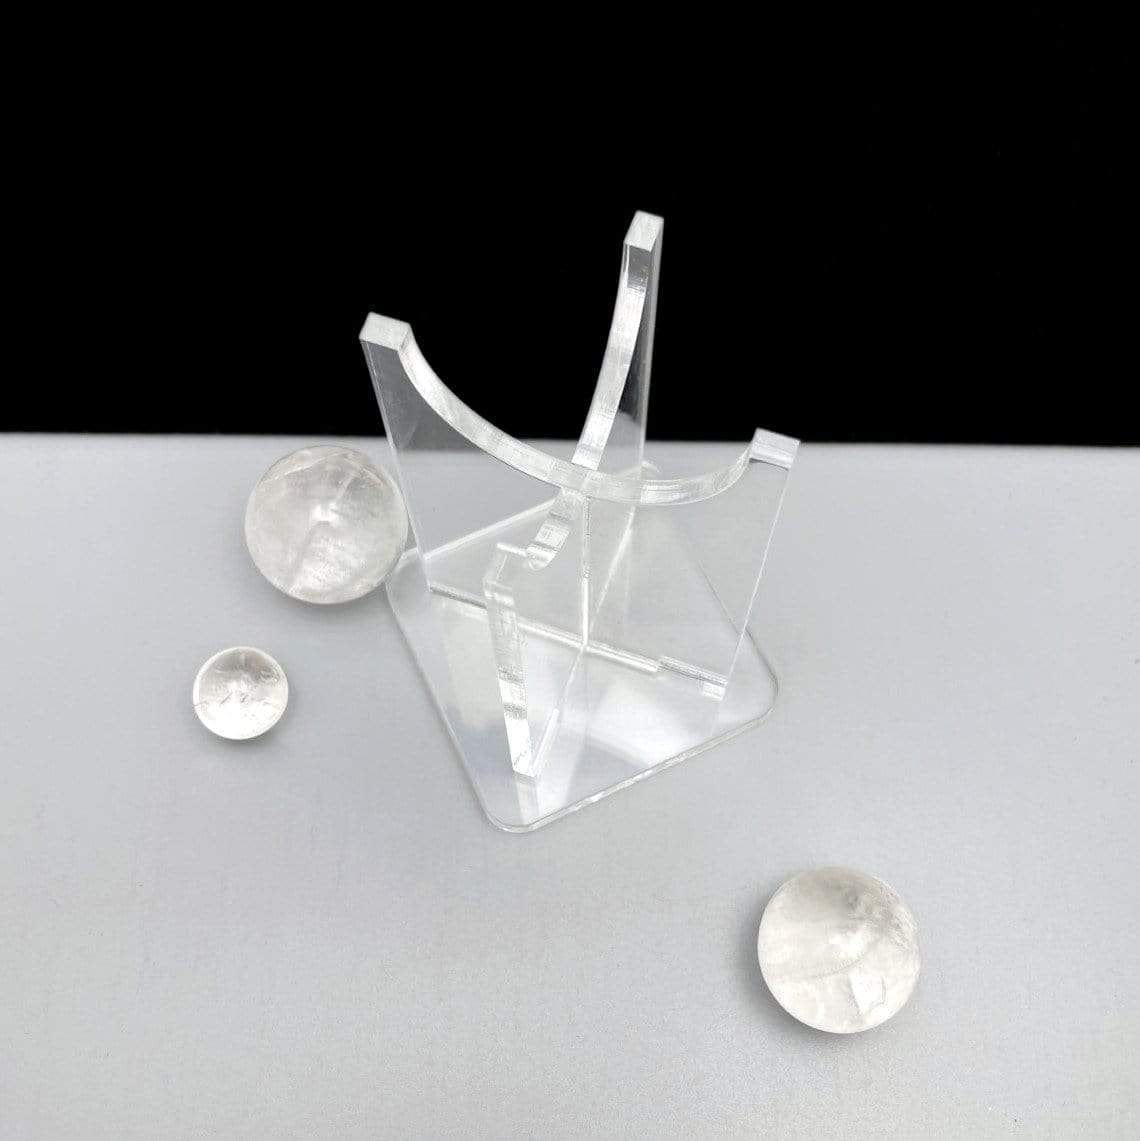 Acrylic Sphere Holder - Crystal Stand from an angle